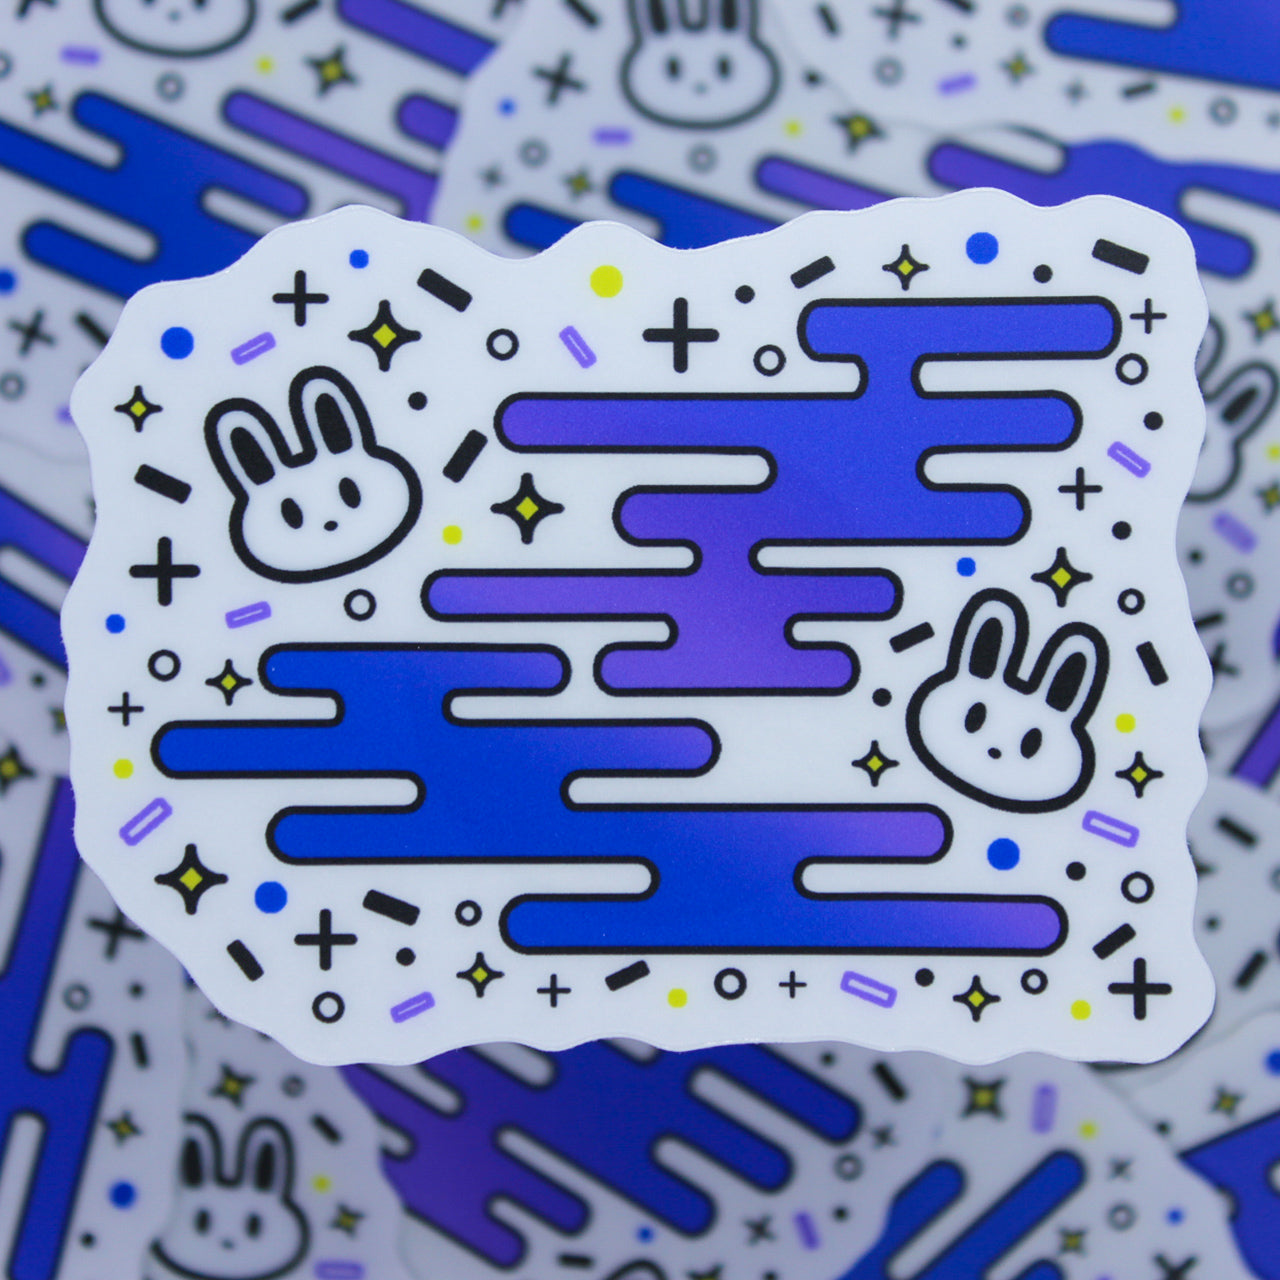 Sticker of two bunnies surrounded by fun shapes. Frosted matte diecut sticker